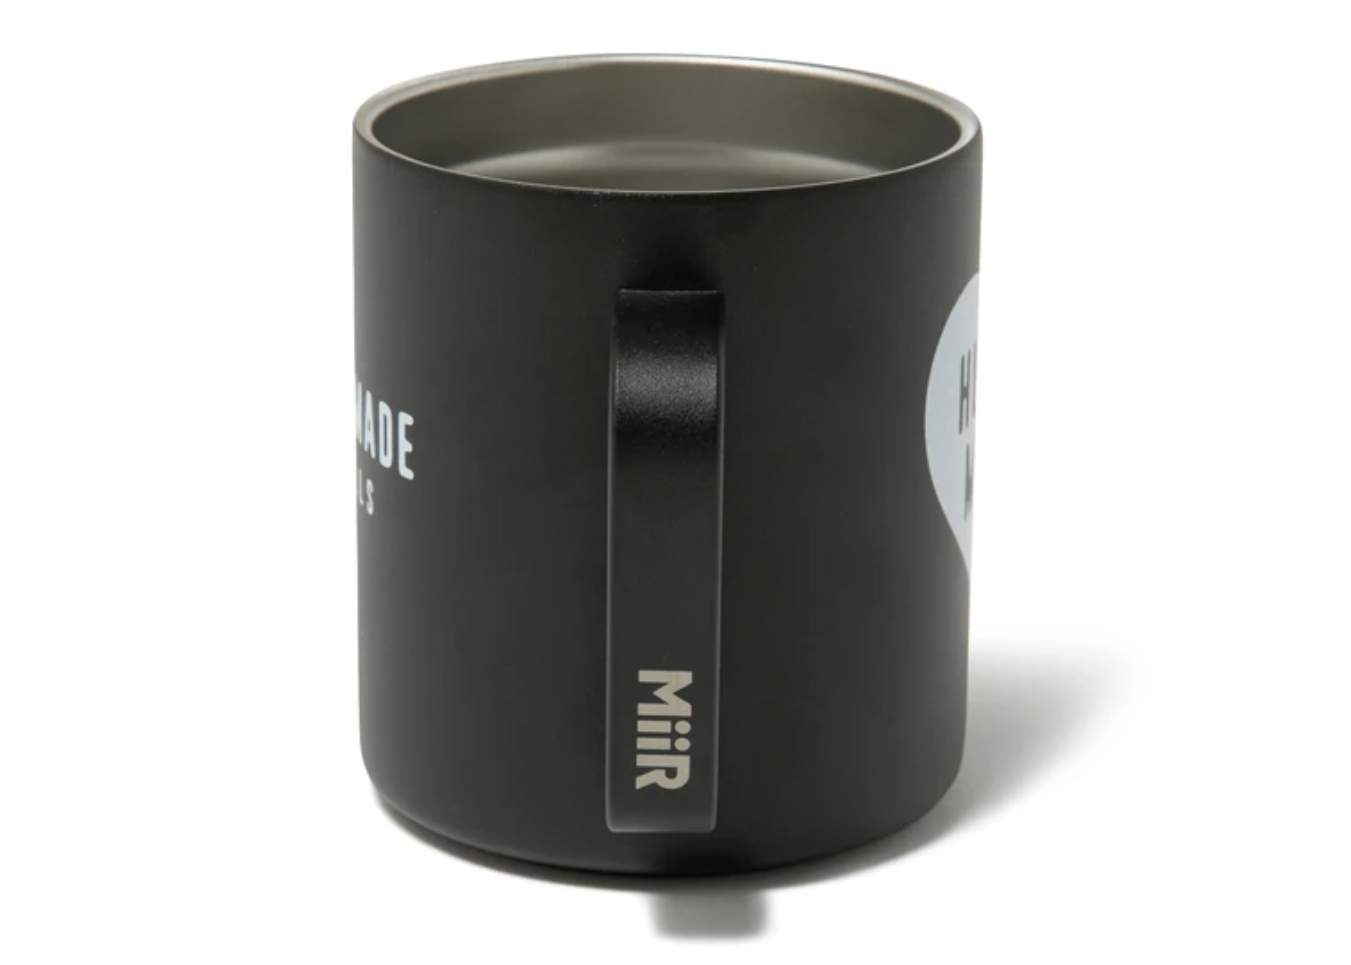 Human Made Insulated 12oz Camp Cup Black - FW21 - US